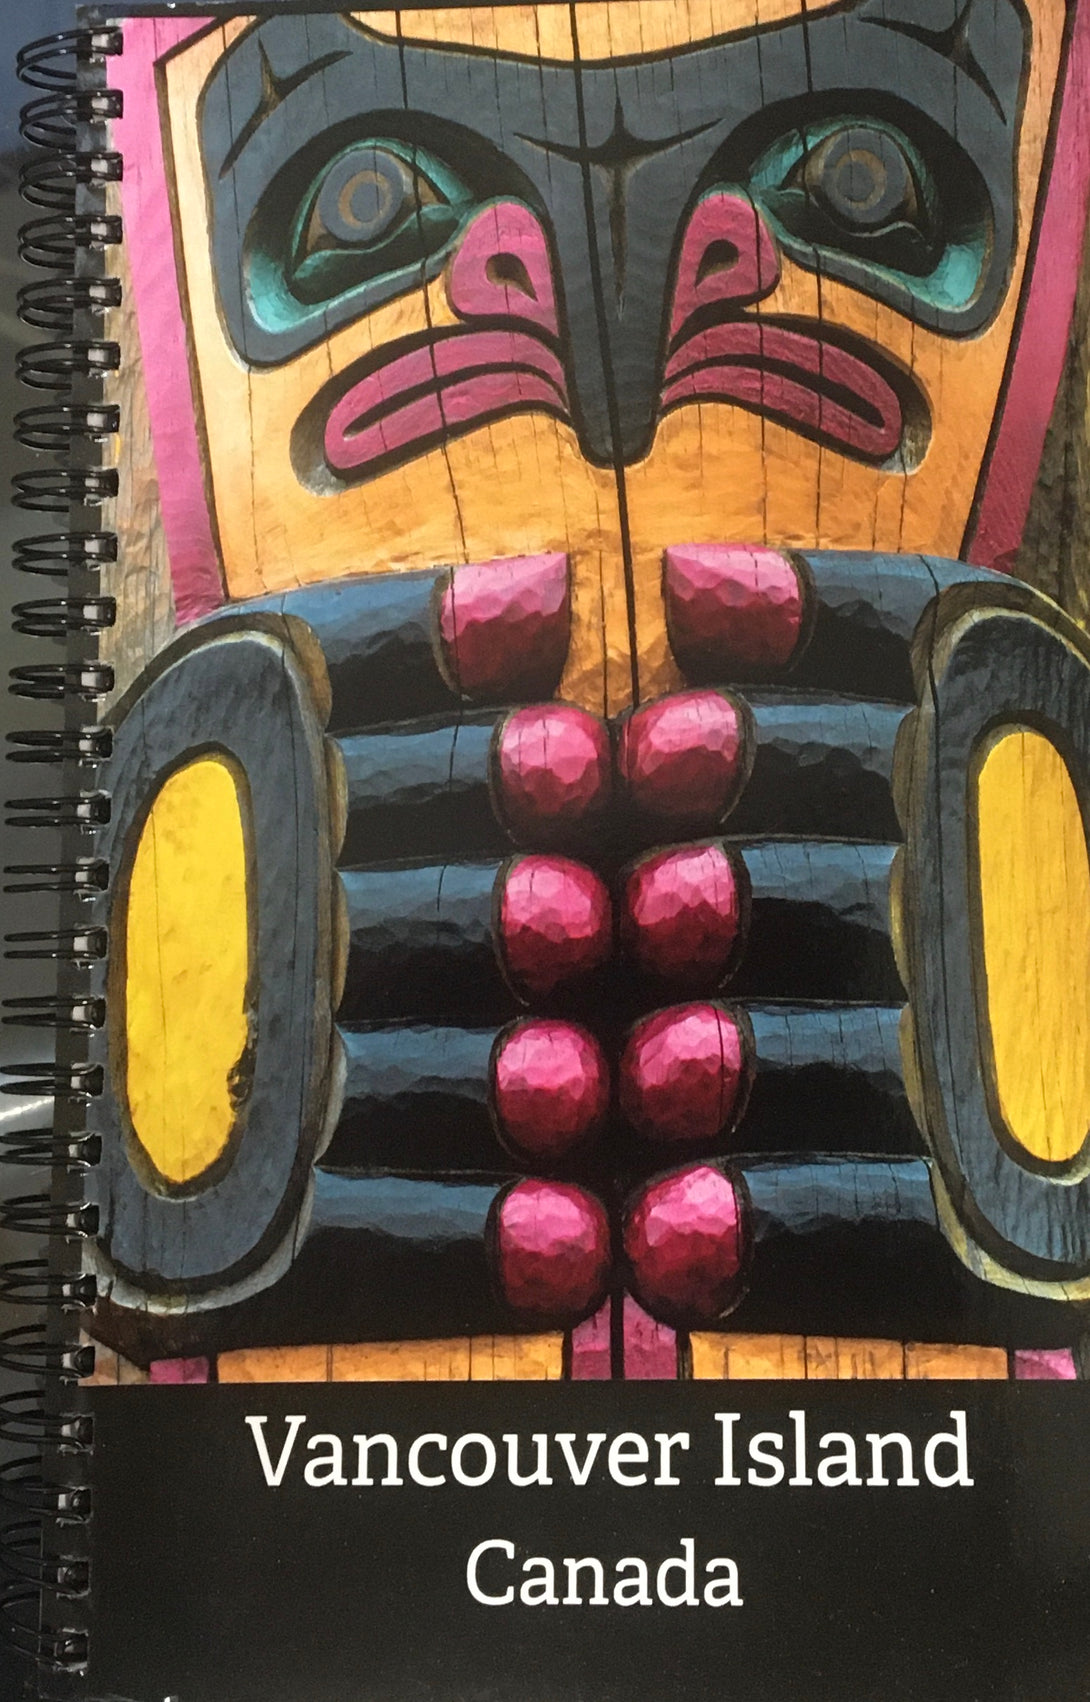 Gerald Fuller - Notebook - photo of a totem pole with 5 red fingers by Gerald Fuller - McMillan Arts Centre - Vancouver Island Art Gallery